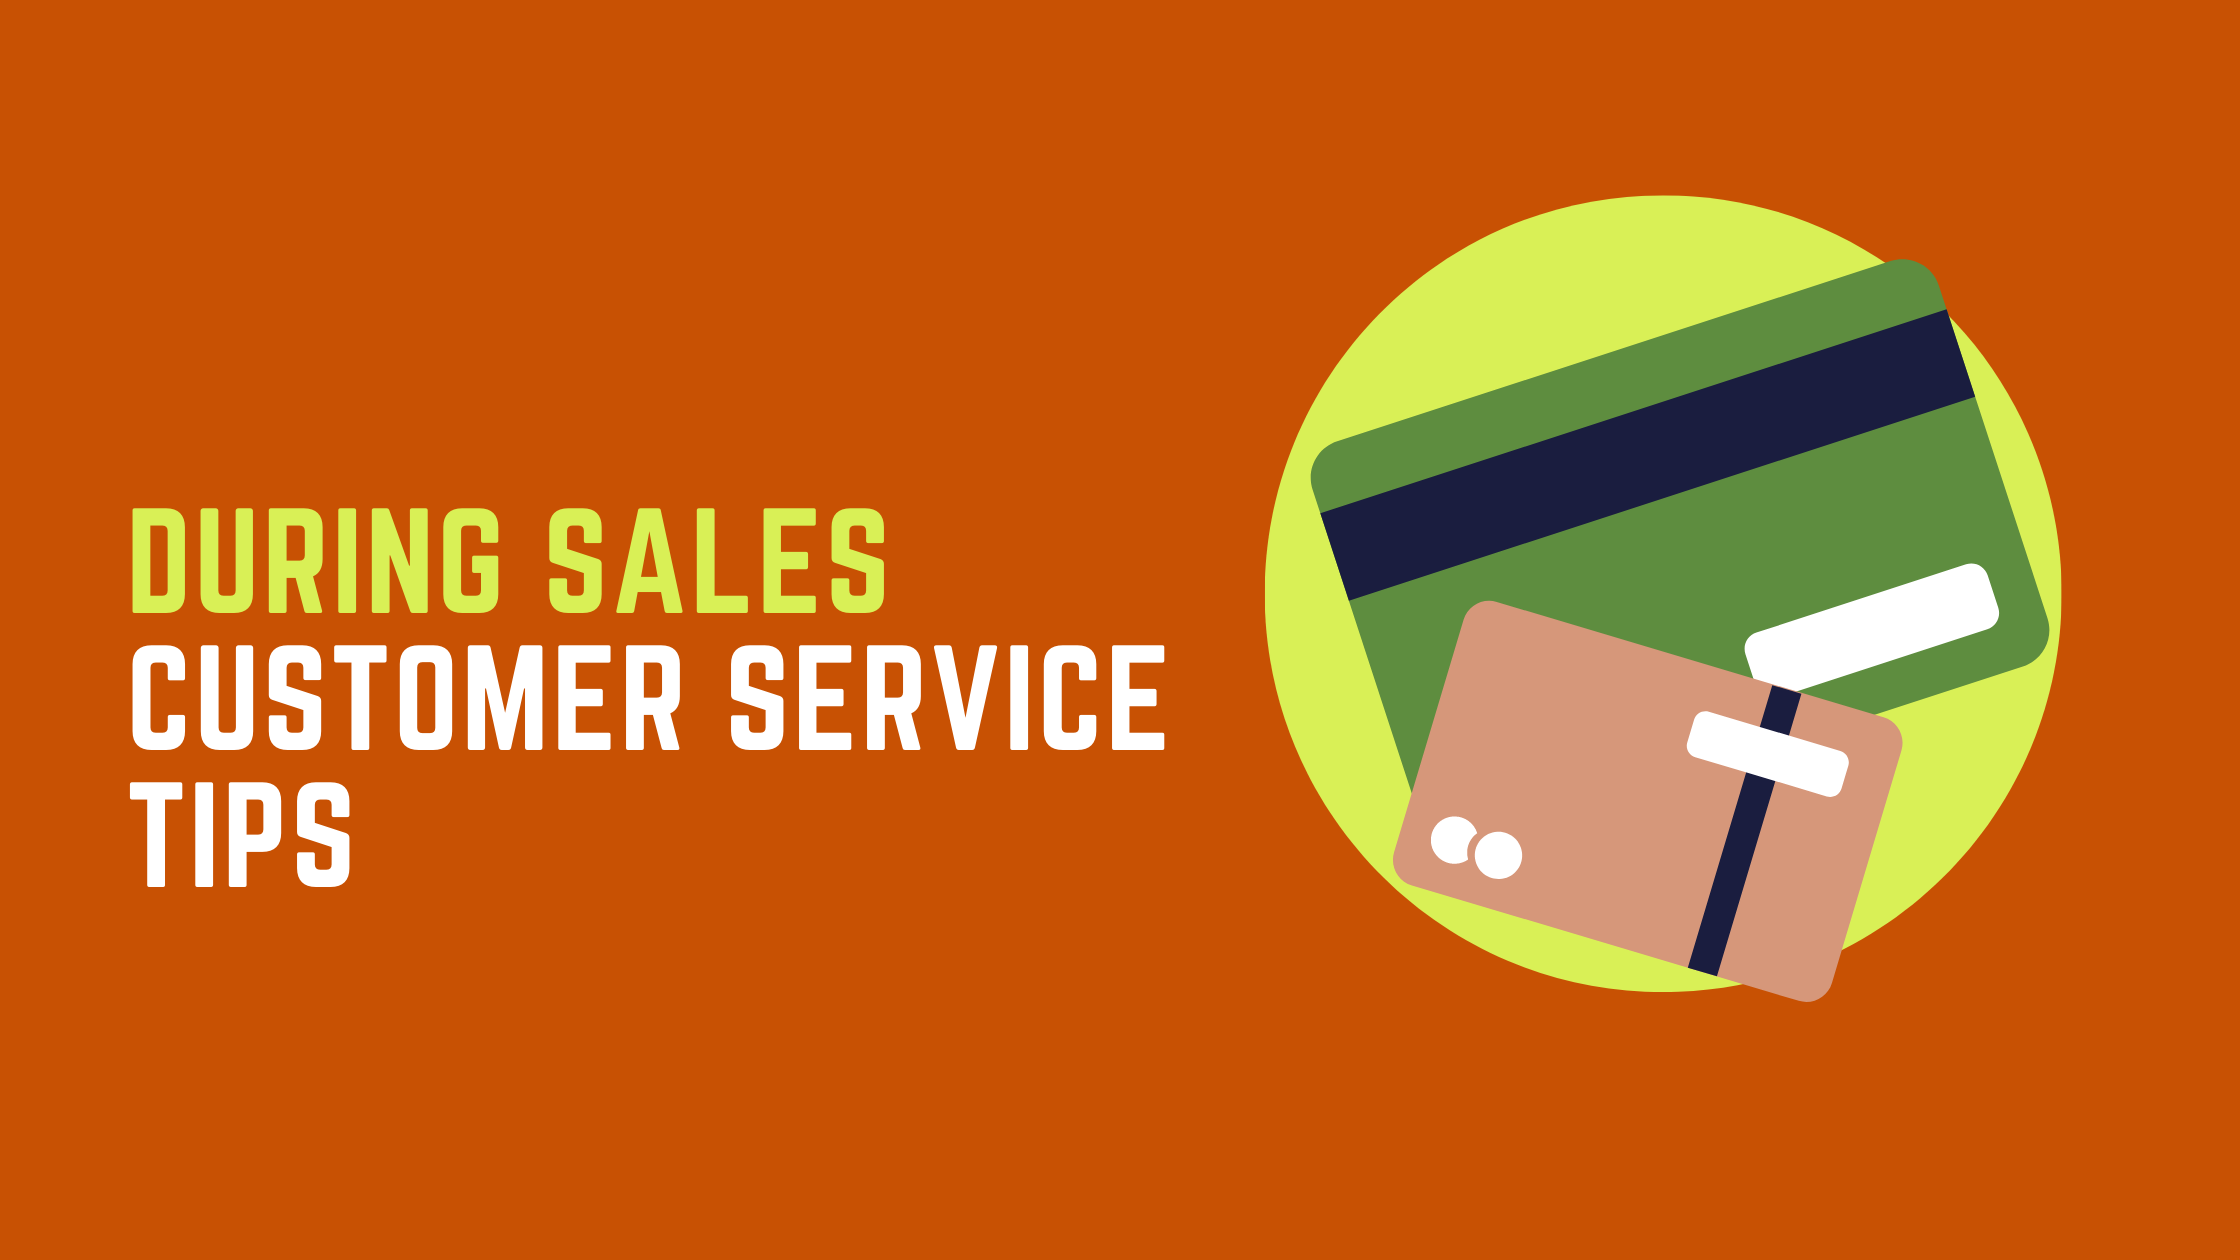 Tips for better customer service on your Shopify store during sales